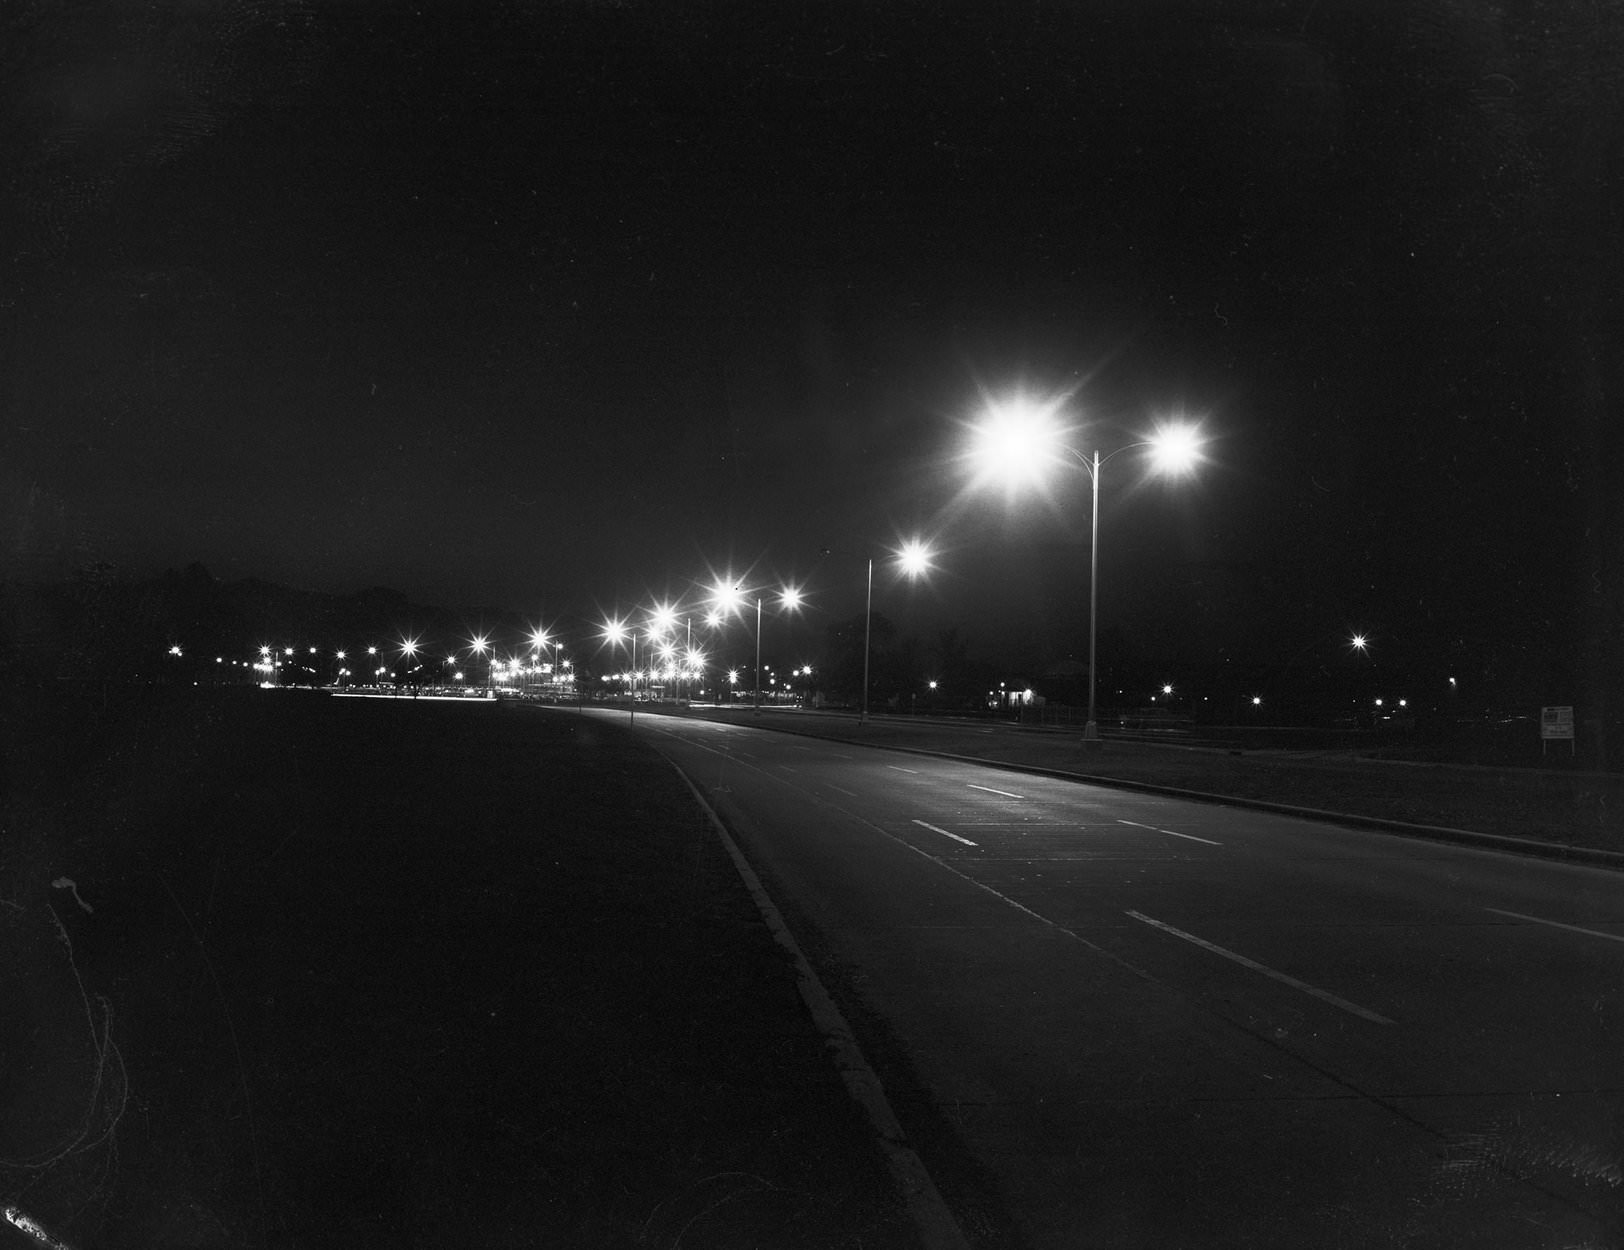 Dallas Love Field at night, 1950. There are lampposts with the lights on, on the side of the street